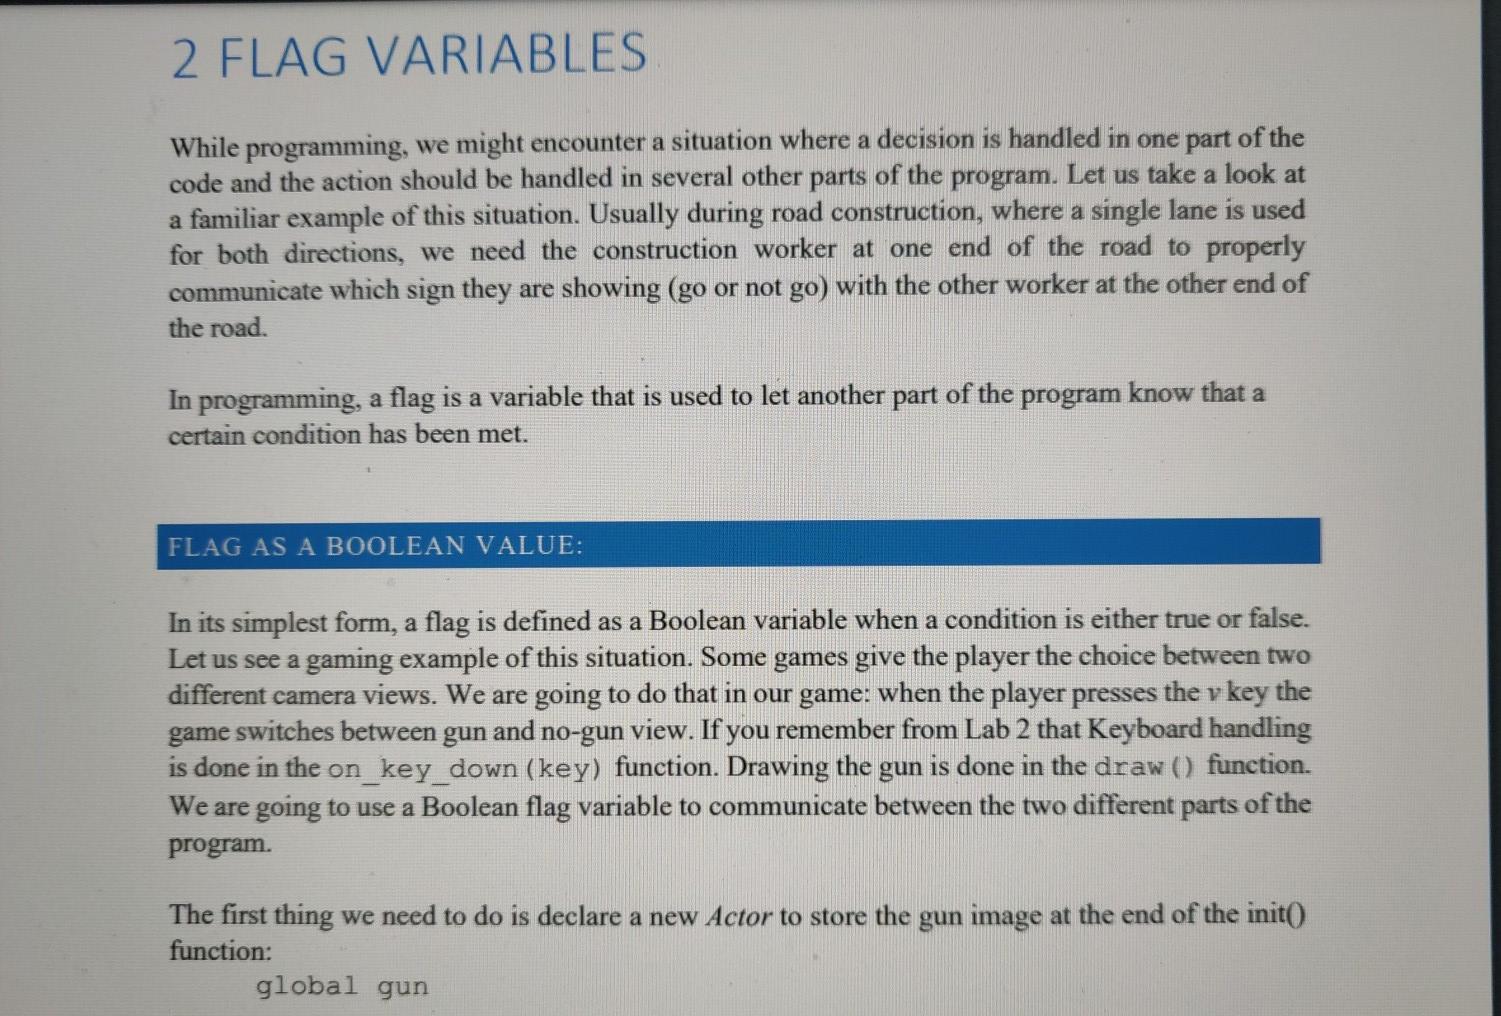 Why do we use flag in programming?